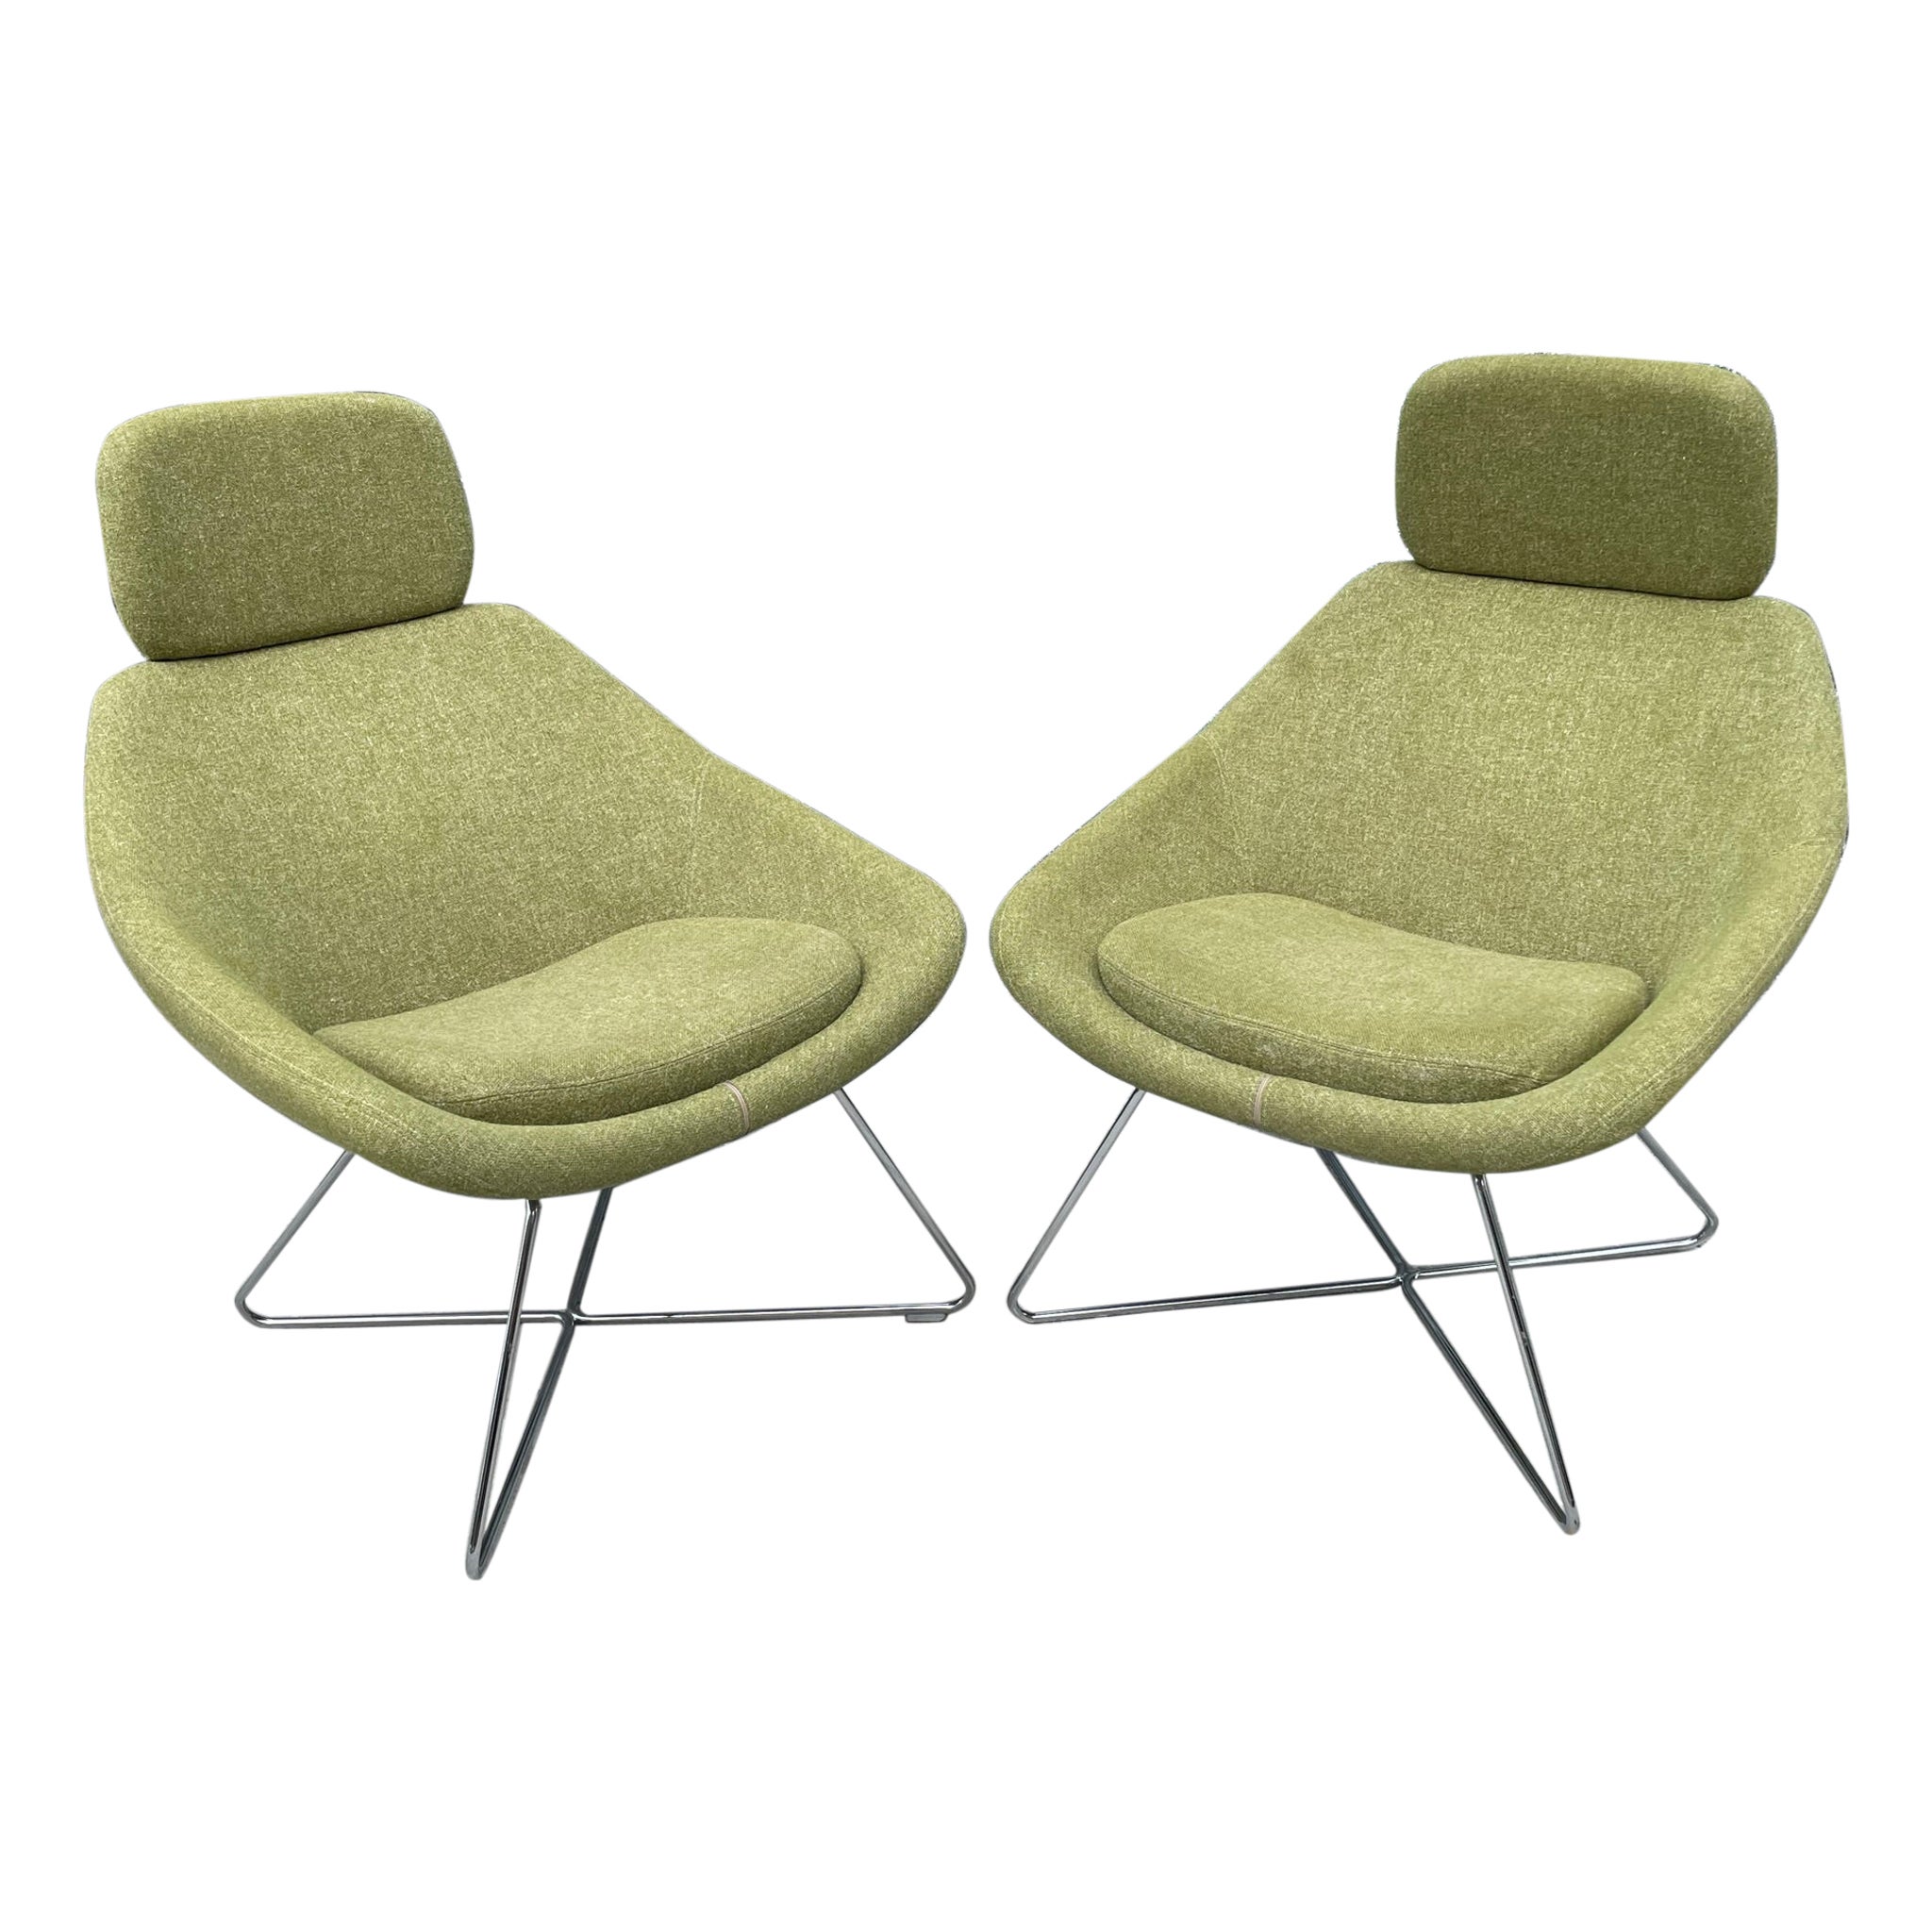 Pair of Open Lounge Chairs by Pearson Lloyd for Allermuir